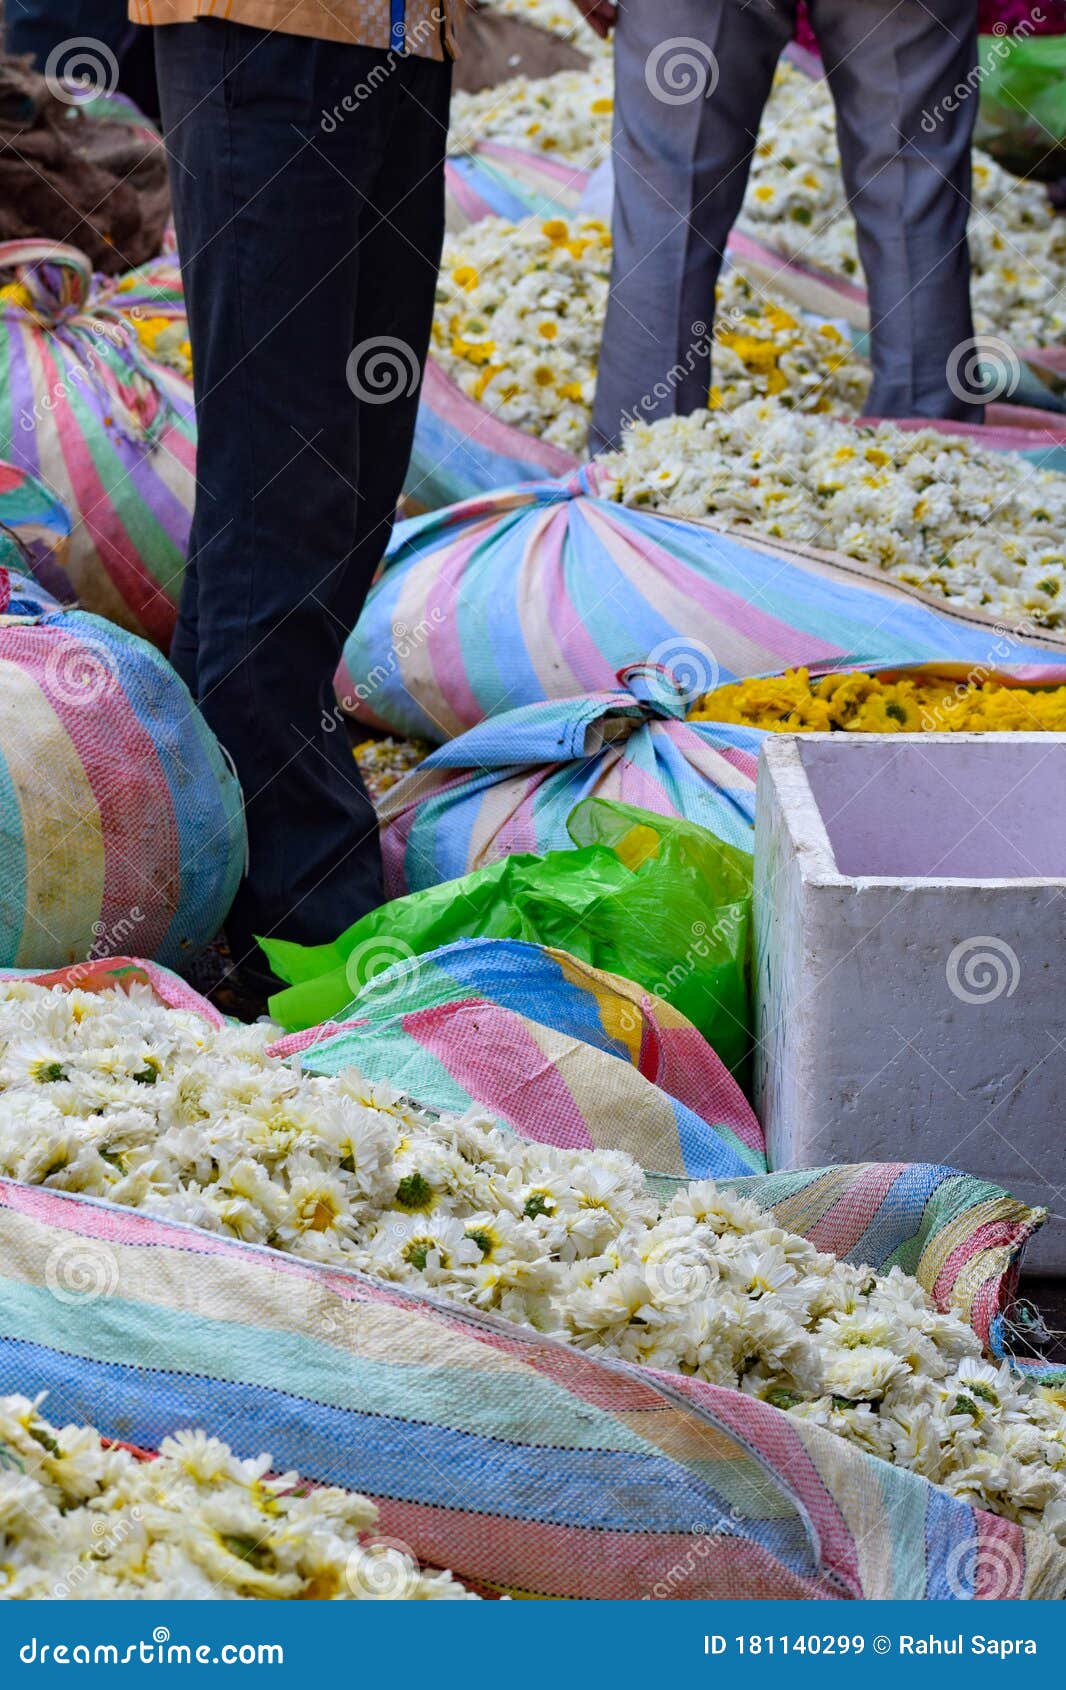 ghazipur phool mandi flower market situation in the morning, the flower it self came from china, vietnam, thailand and india